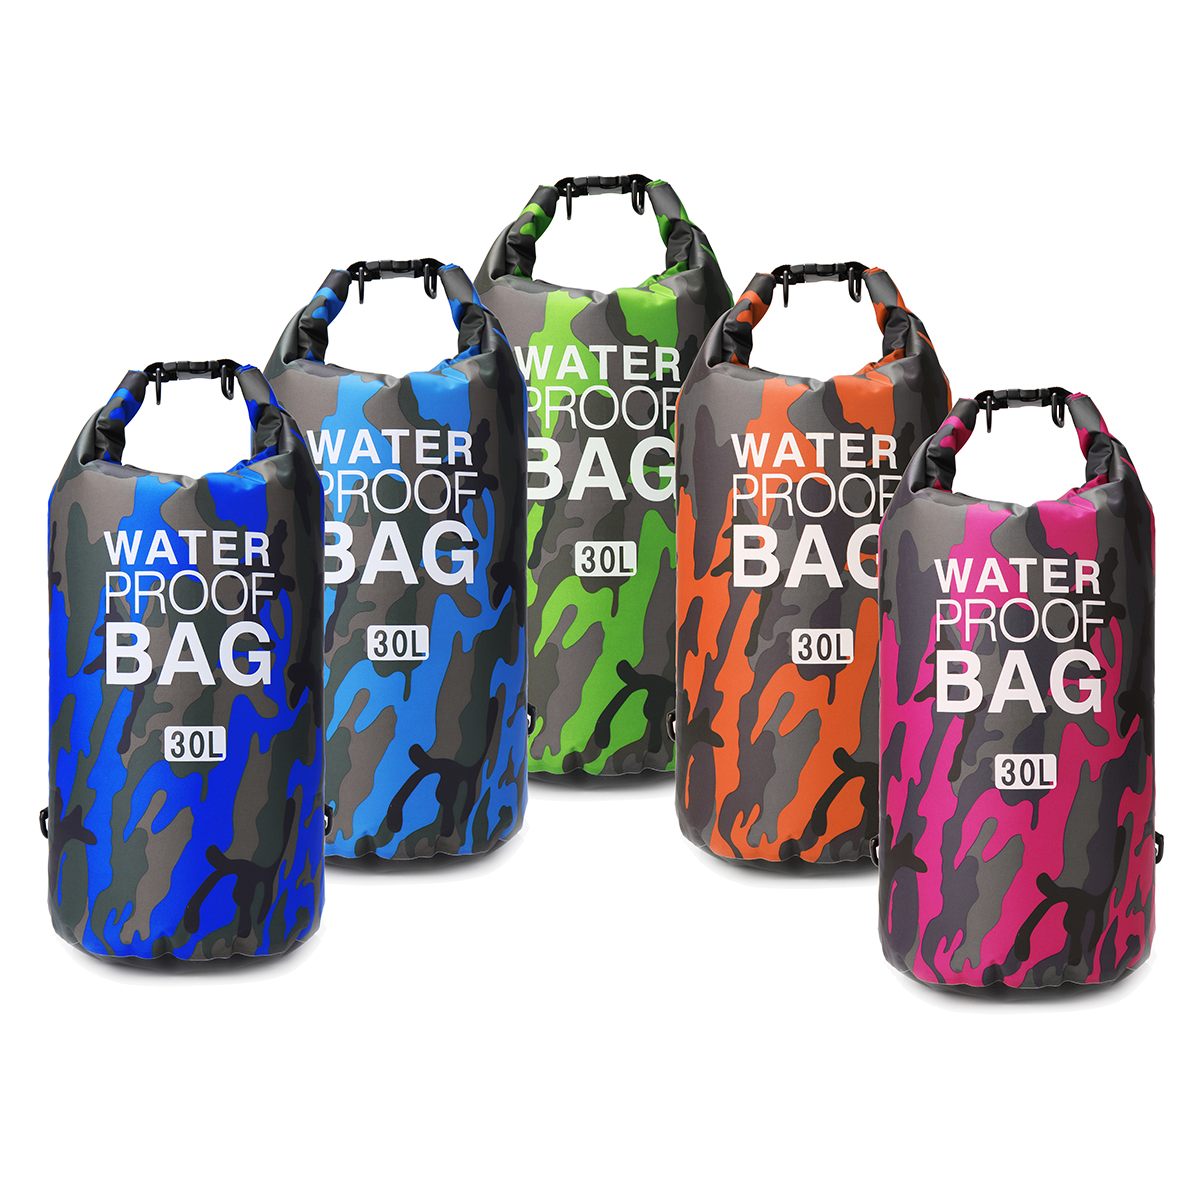 30L-Outdoor-Sports-Waterproof-Dry-Bag-Backpack-Pouch-For-Floating-Boating-Kayaking-Camping-1338574-4